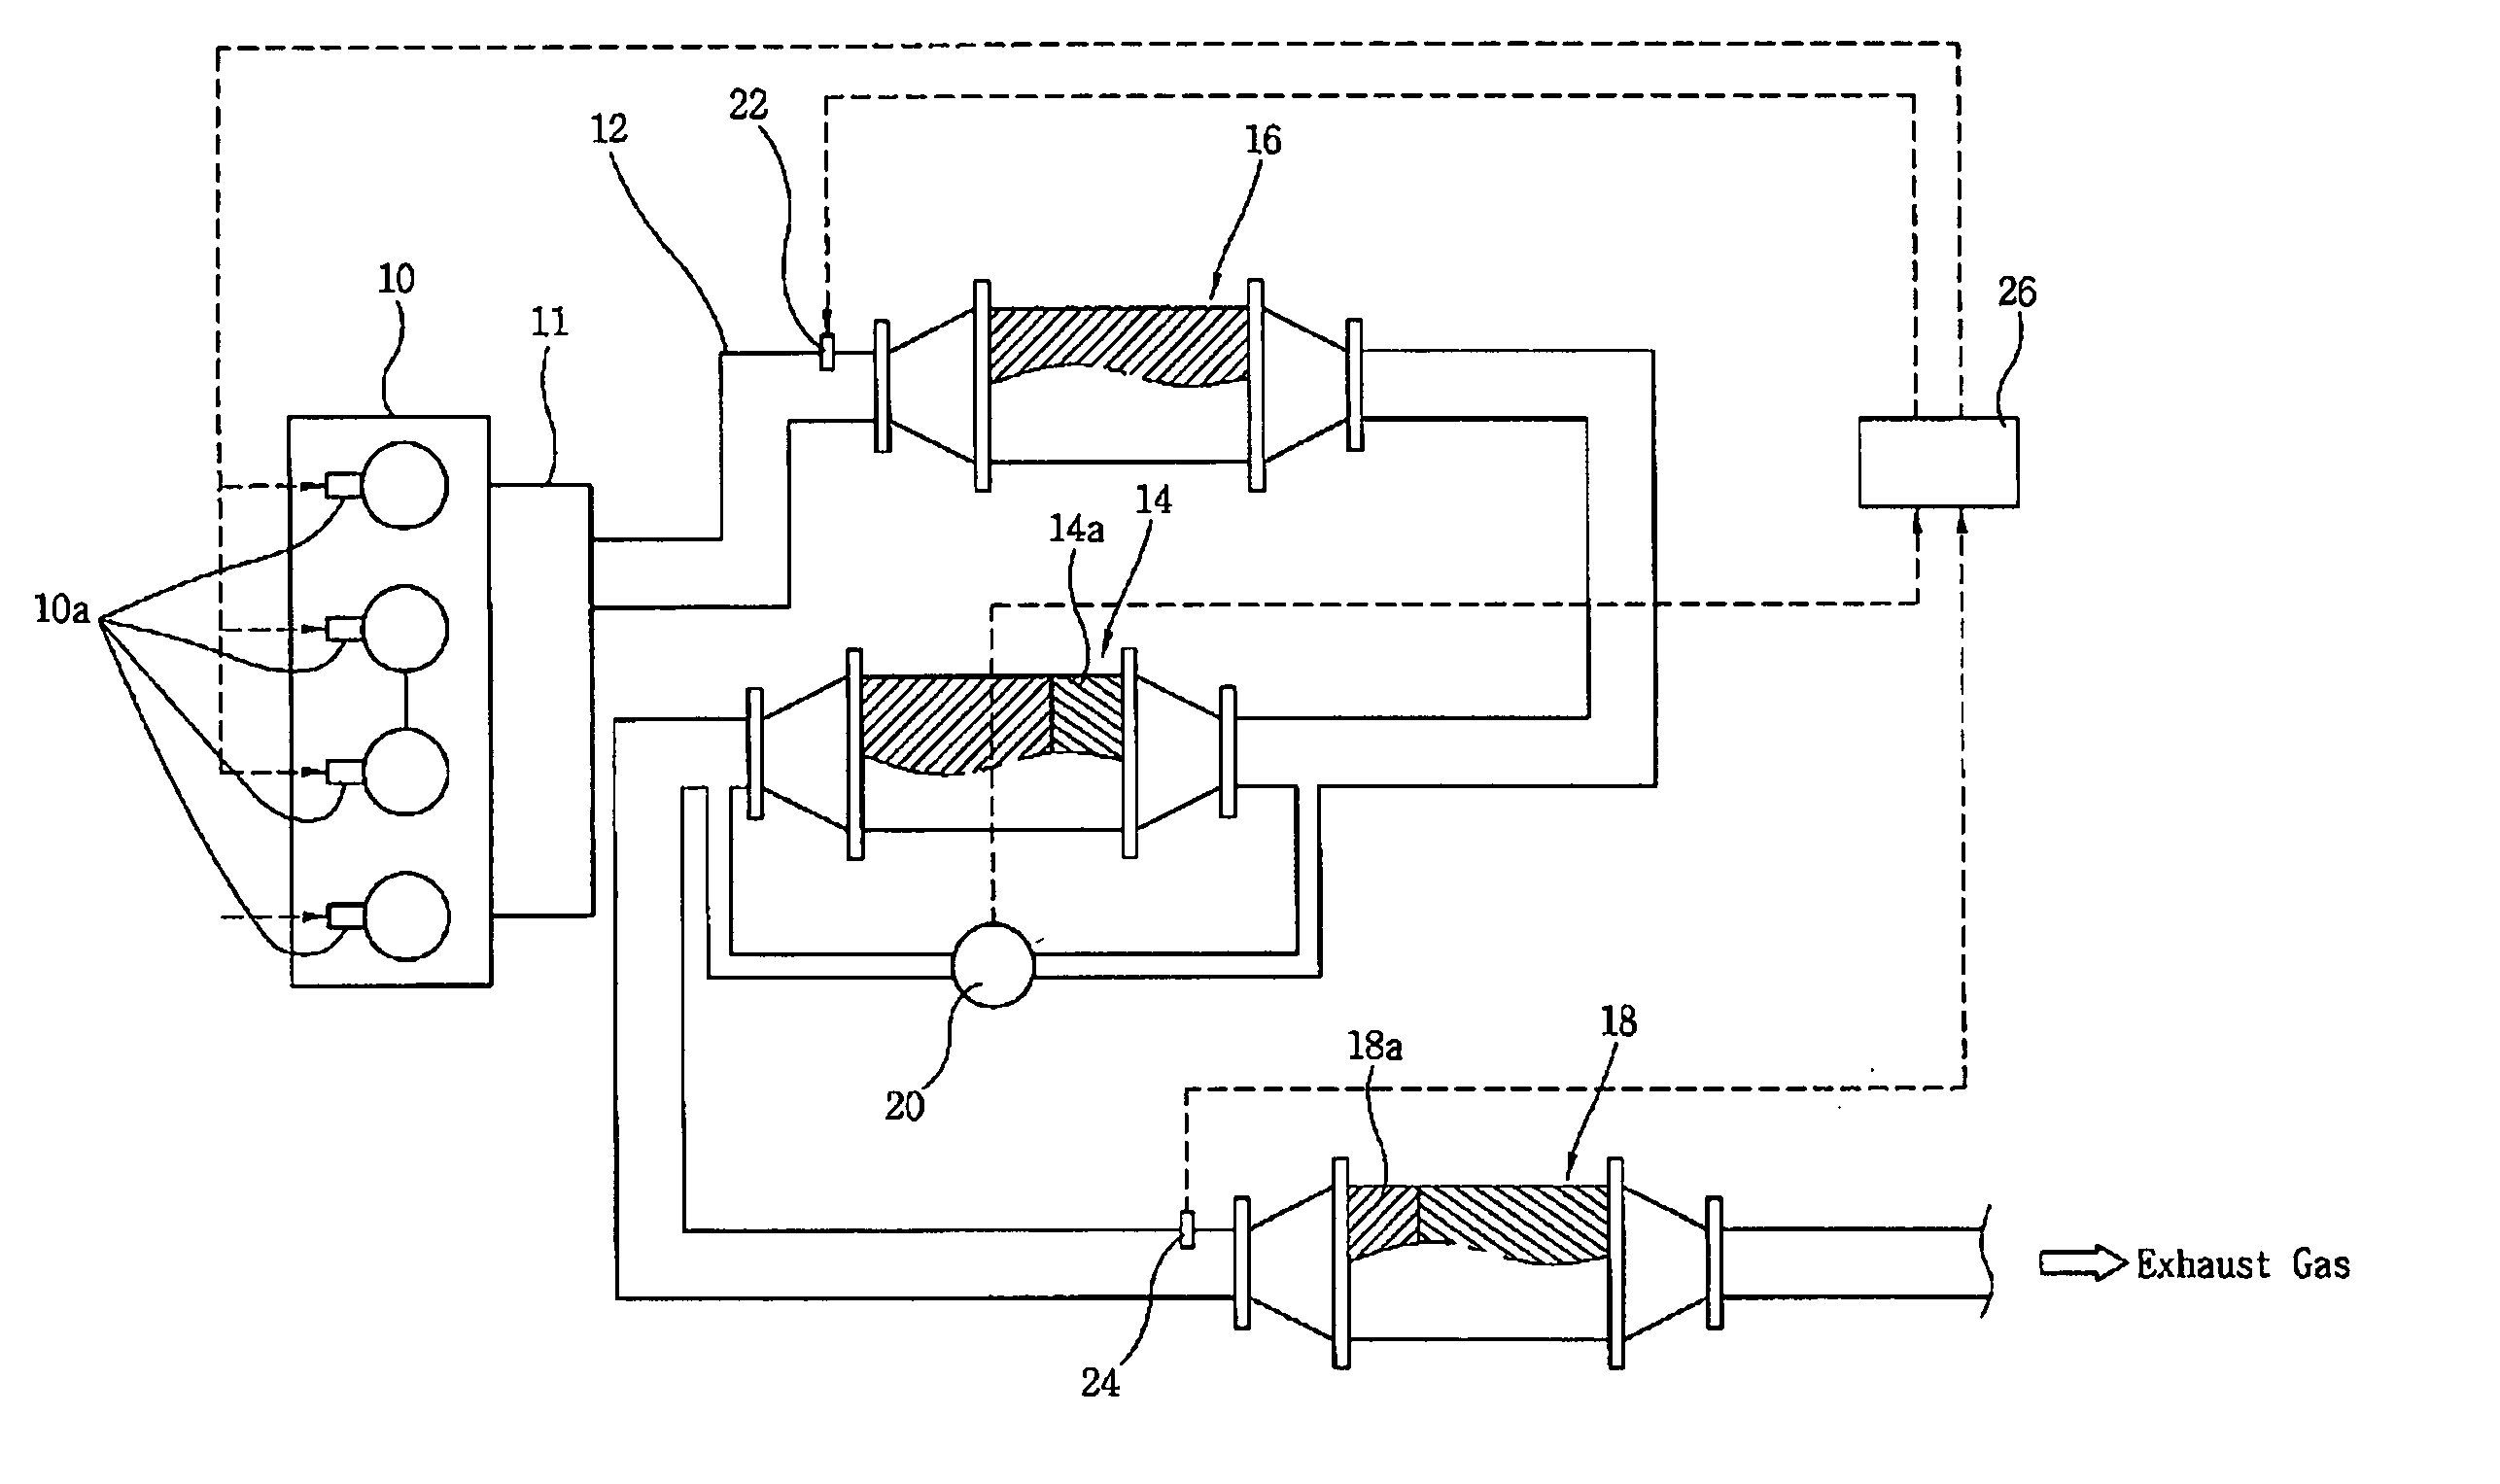 Purification device for decreasing particulate matter and nitrogen oxides in diesel engine